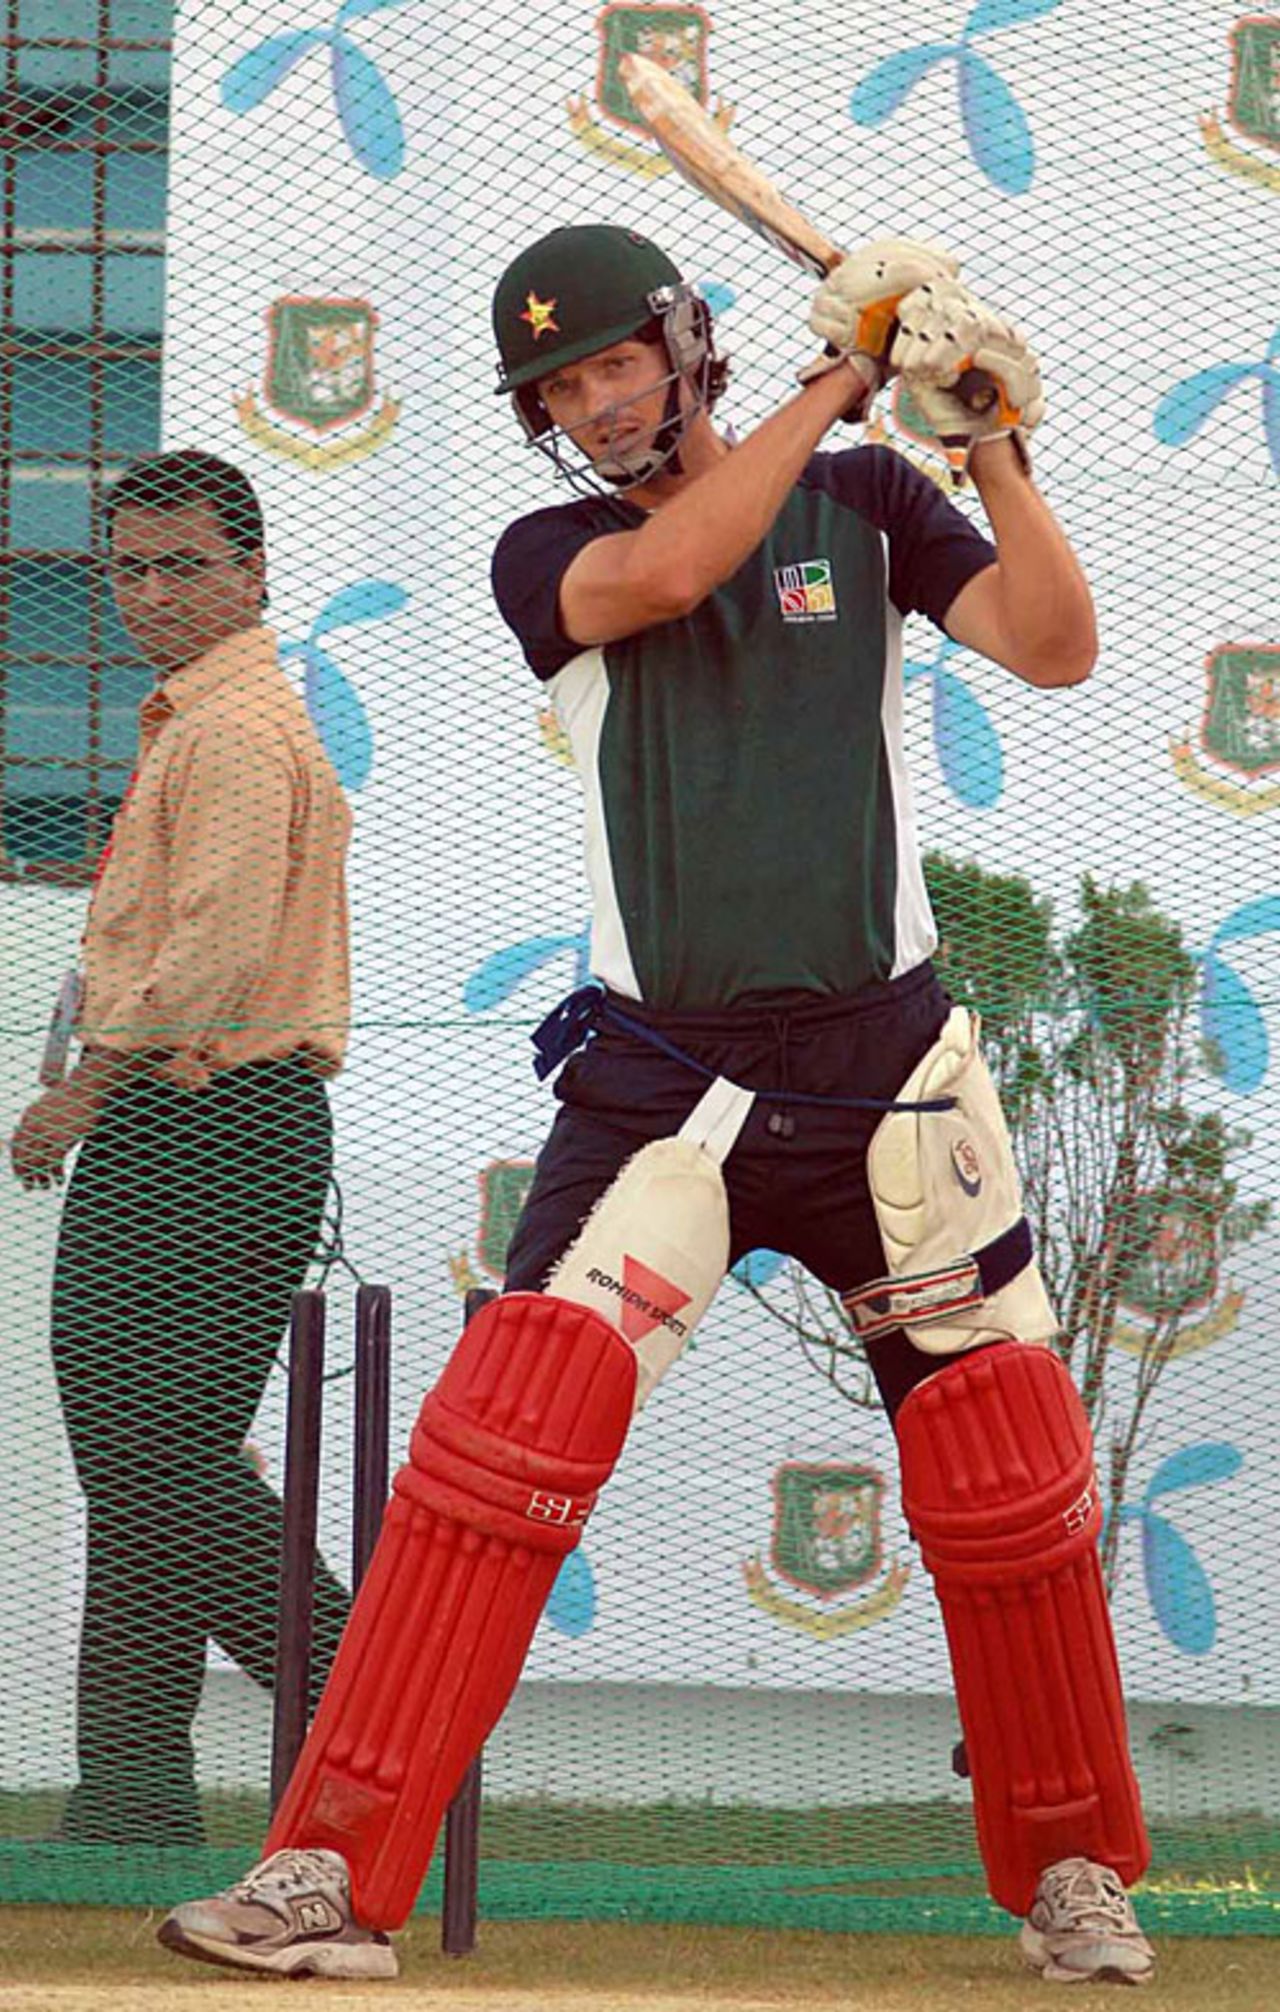 Mark Vermeulen is all concentration at batting practice, Chittagong, November 2, 2009